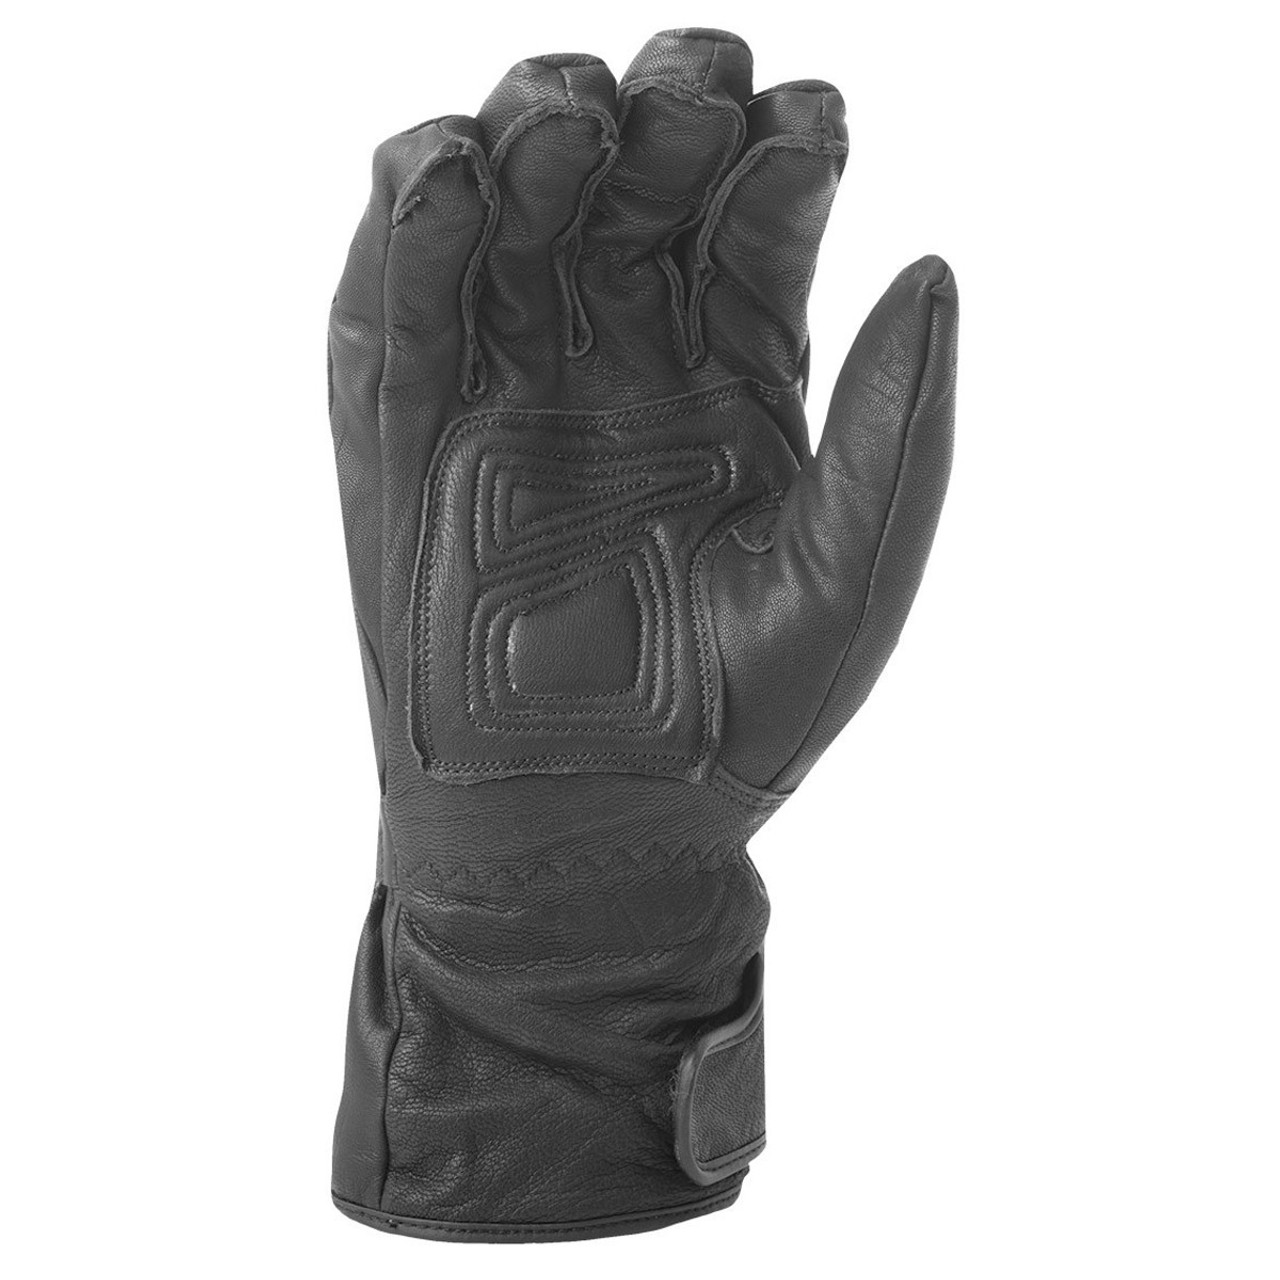 Highway 21 Granite Cold Weather Leather Motorcycle Gloves - Team Motorcycle